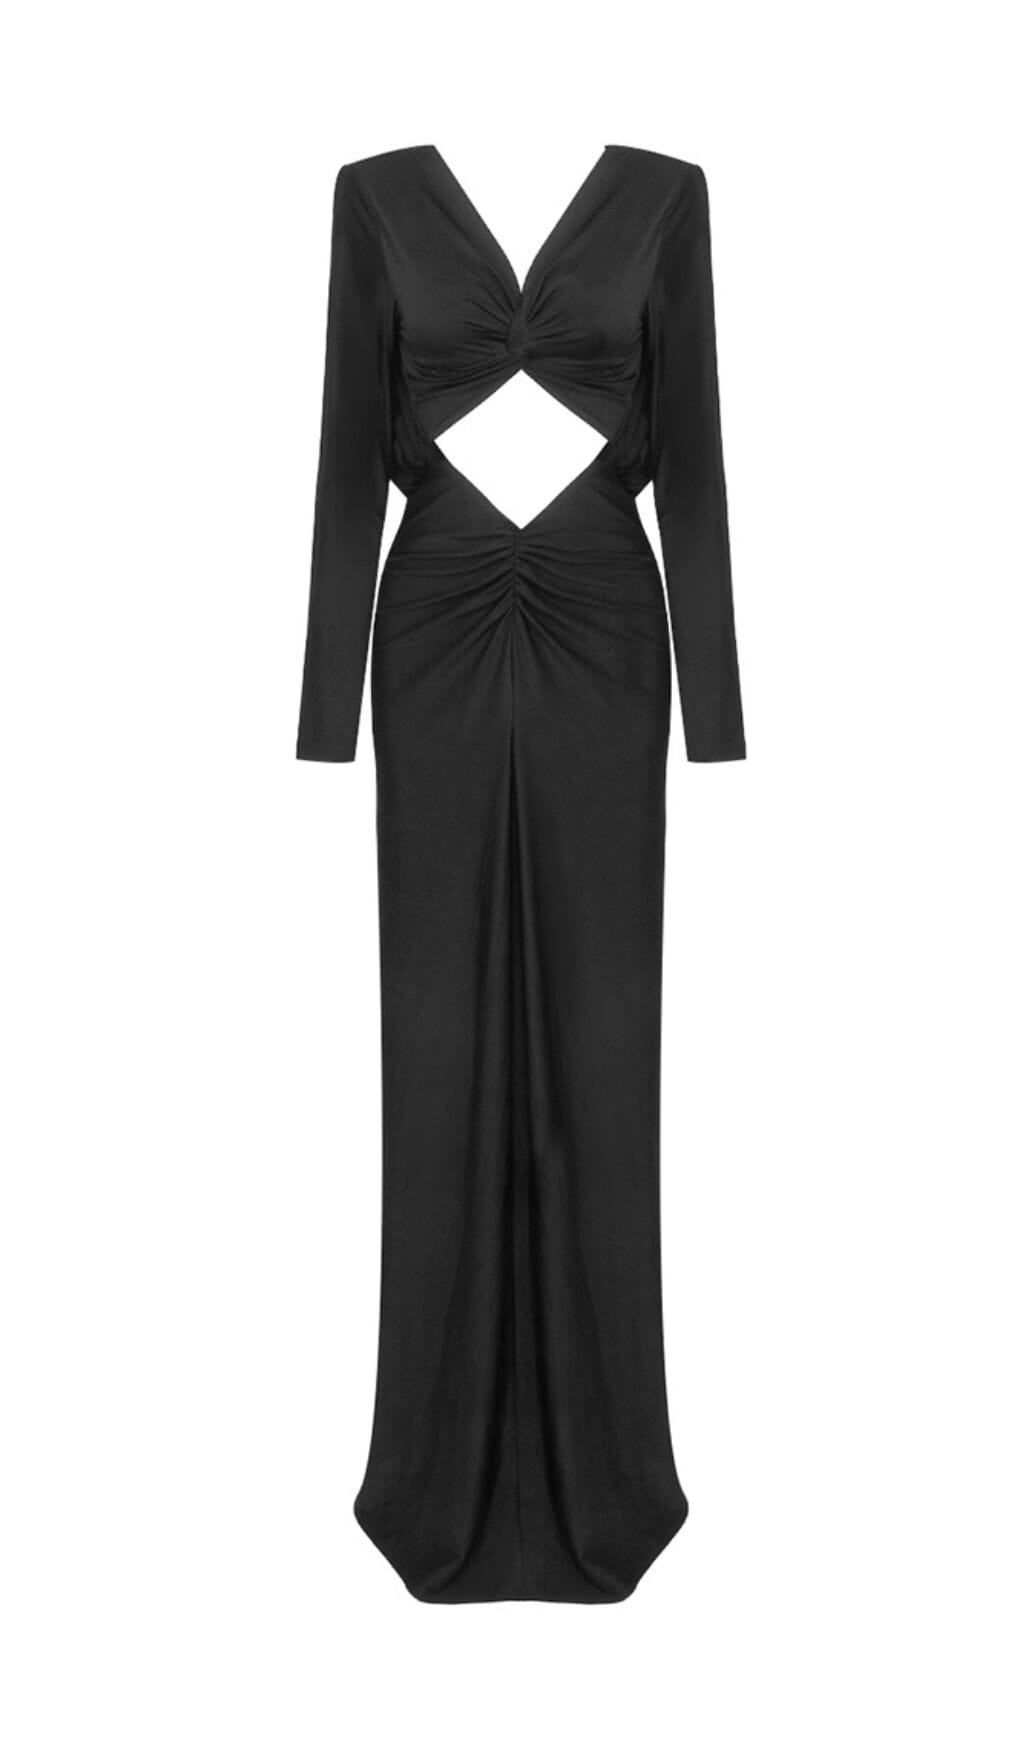 JERSEY CUT OUT MAXI DRESS IN BLACK